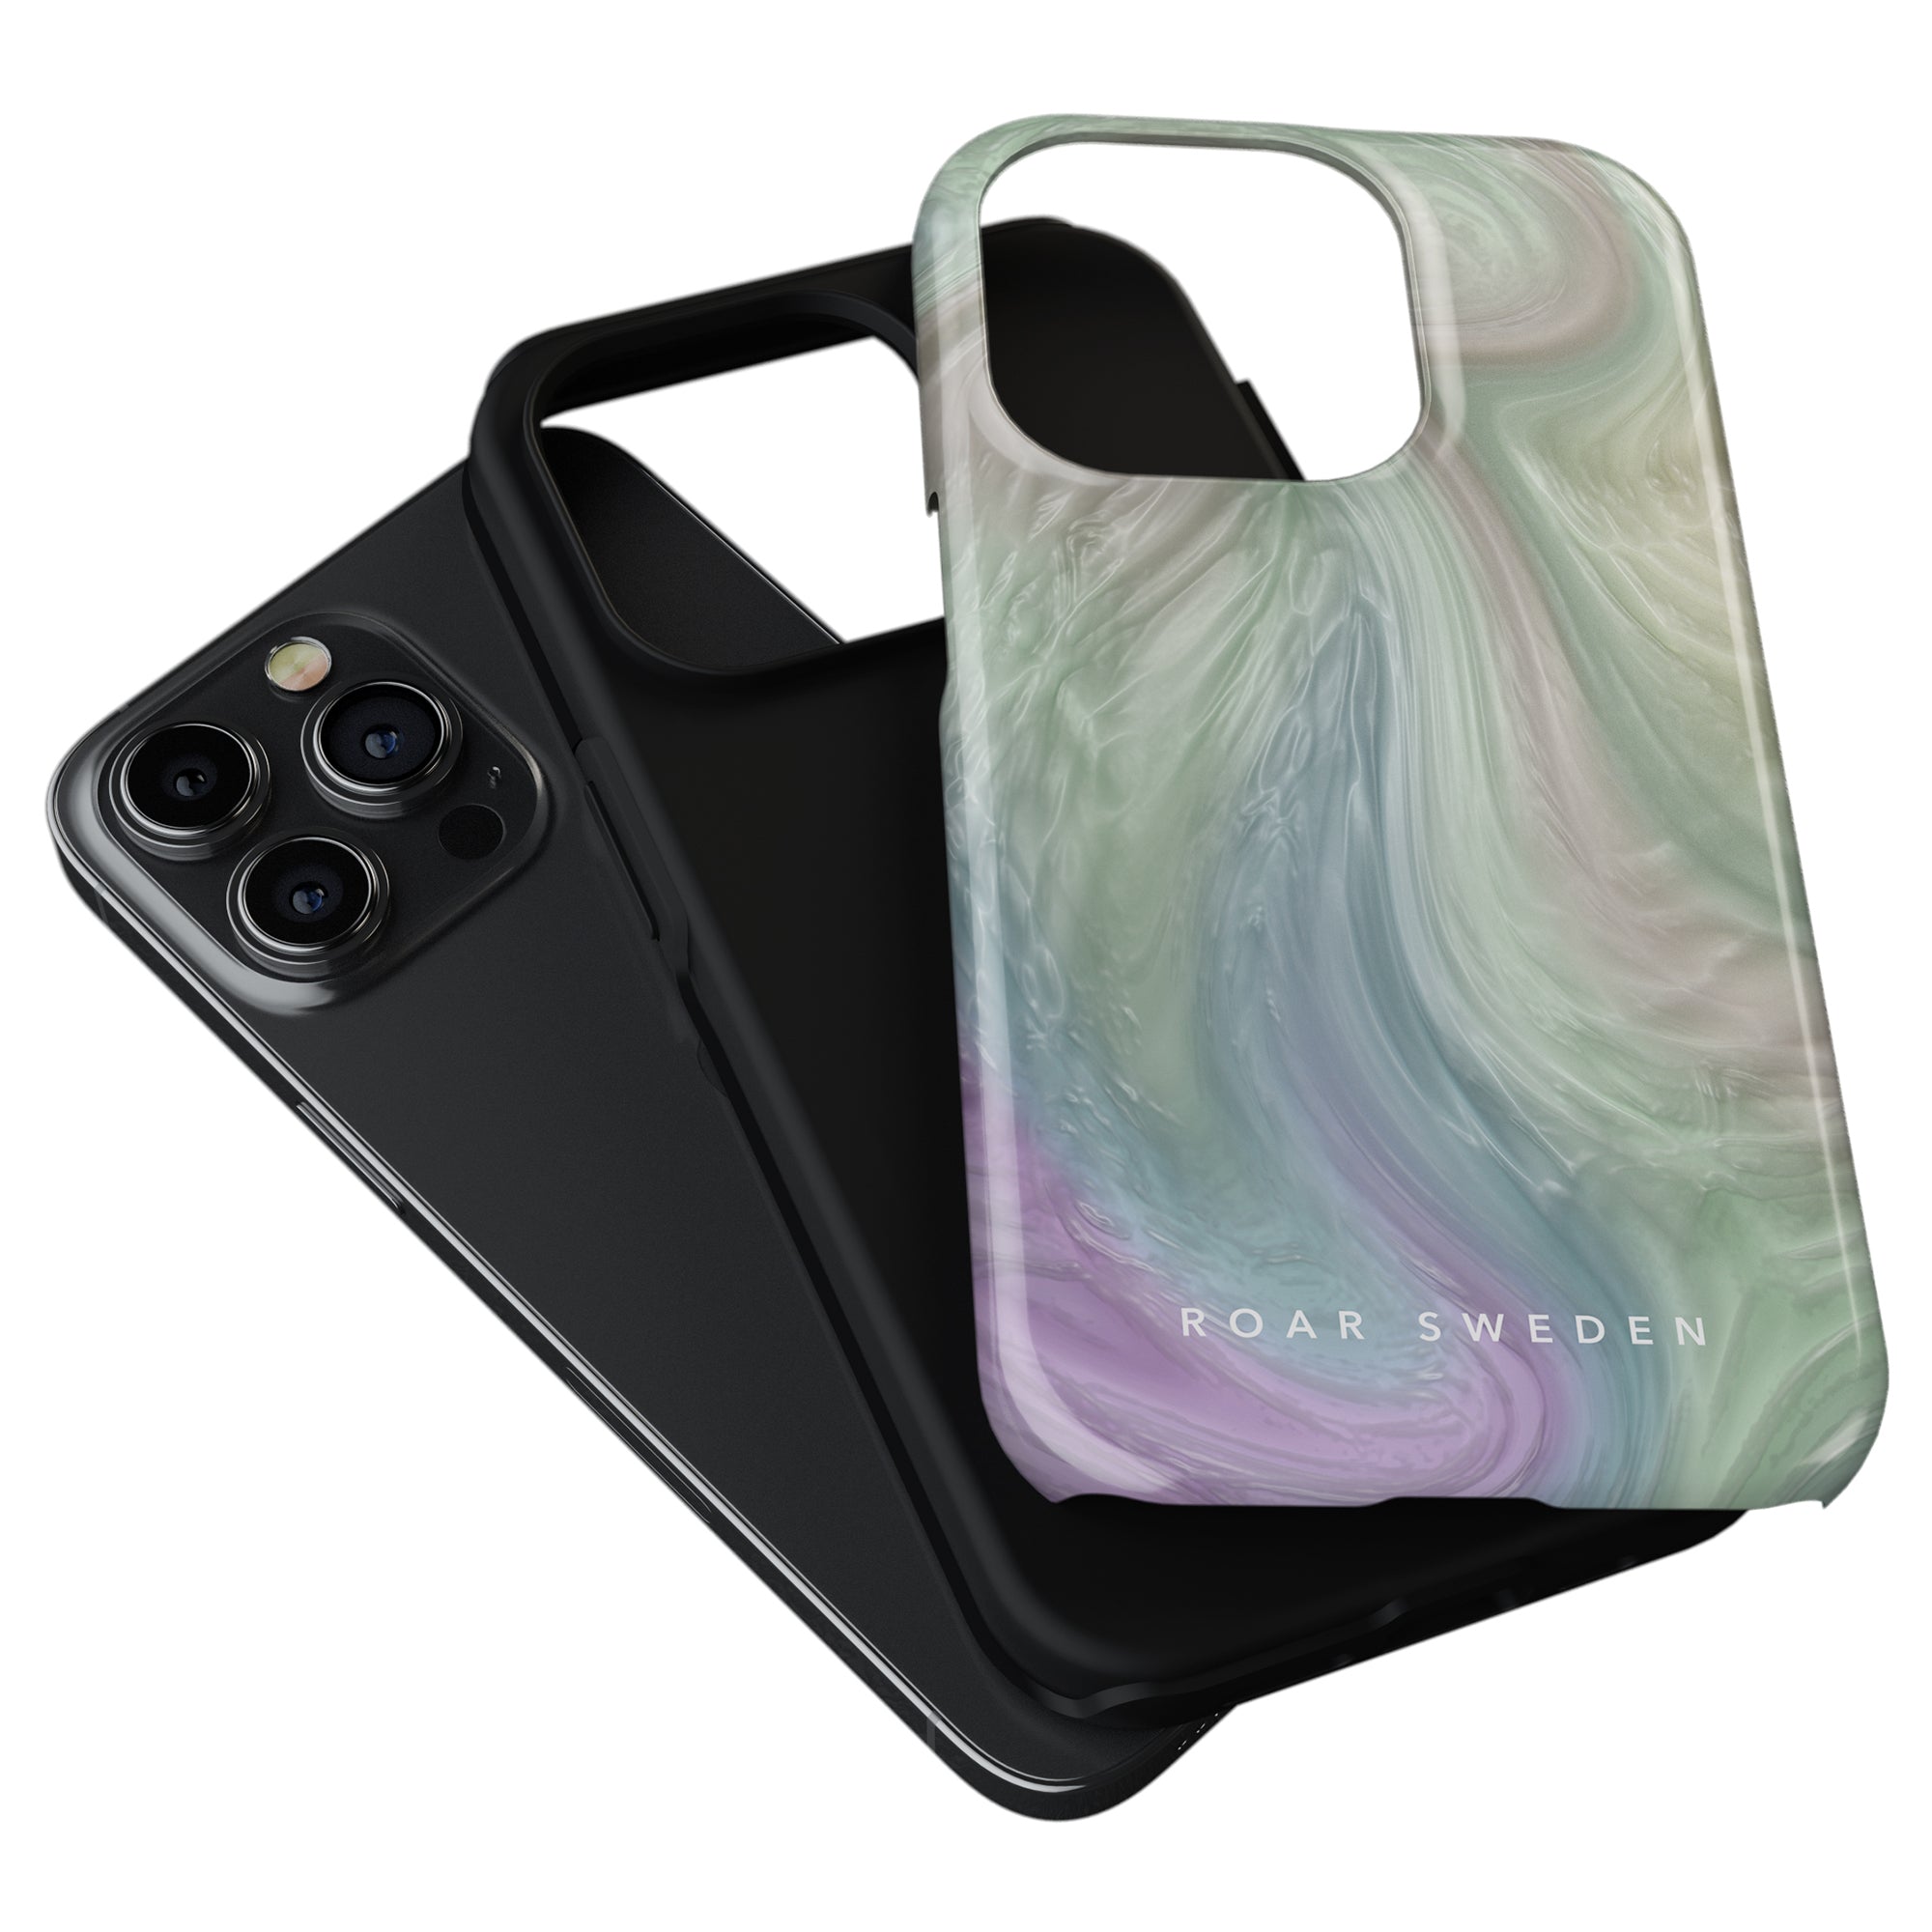 Two smartphone cases, one black and one with a swirling pastel design from the Nacre - Tough Case Collection, labeled "roar sweden," displayed on a white background.